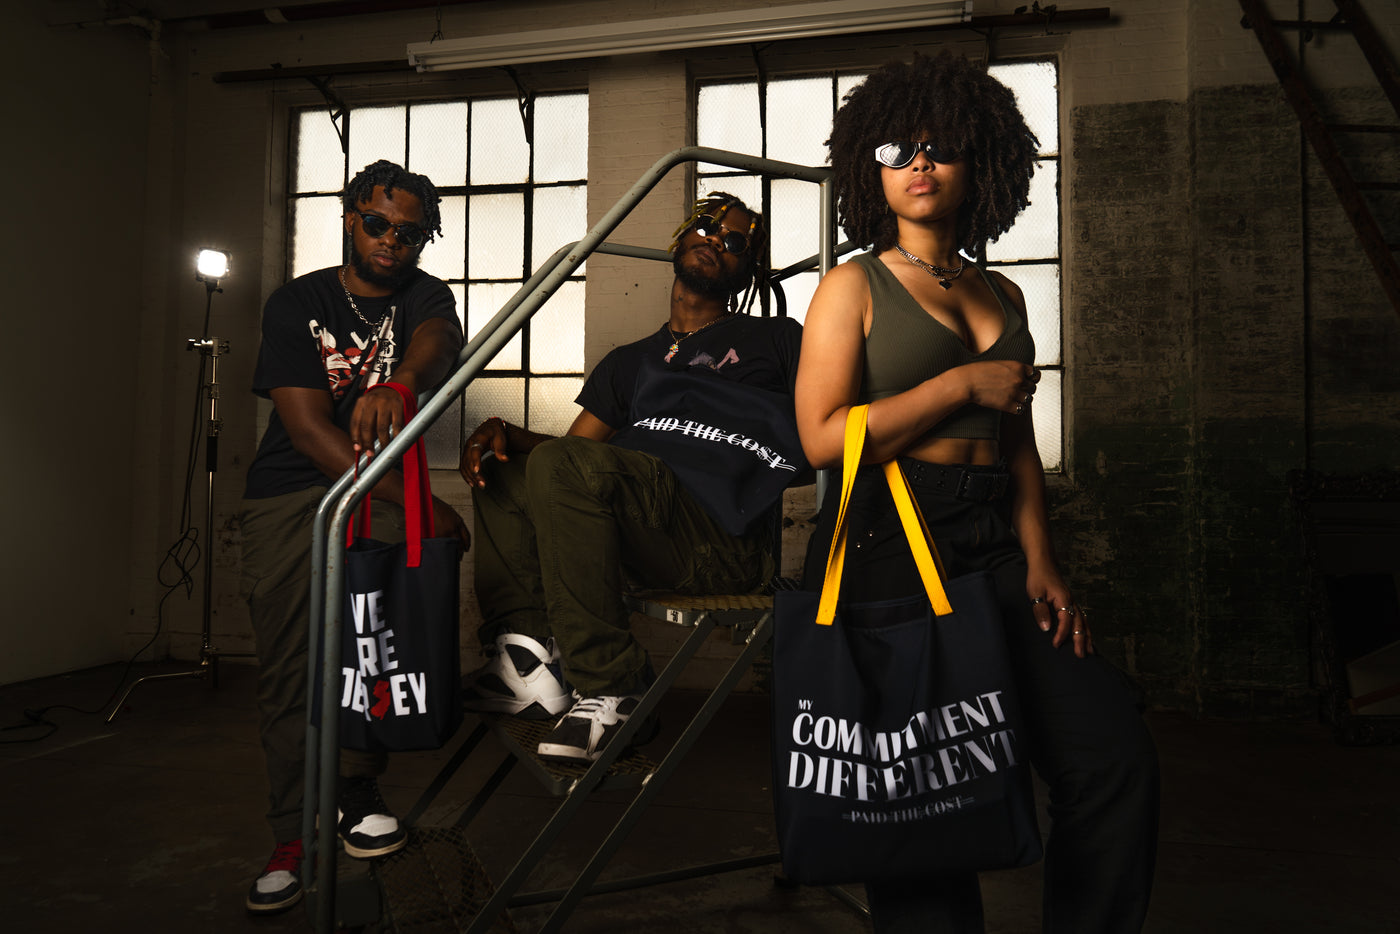 Tote Bag Aesthetic - New Jersey Tote Bag - We Are Jersey Magazine - Model Faith Rodriguez - Photographer LacQuan Scott